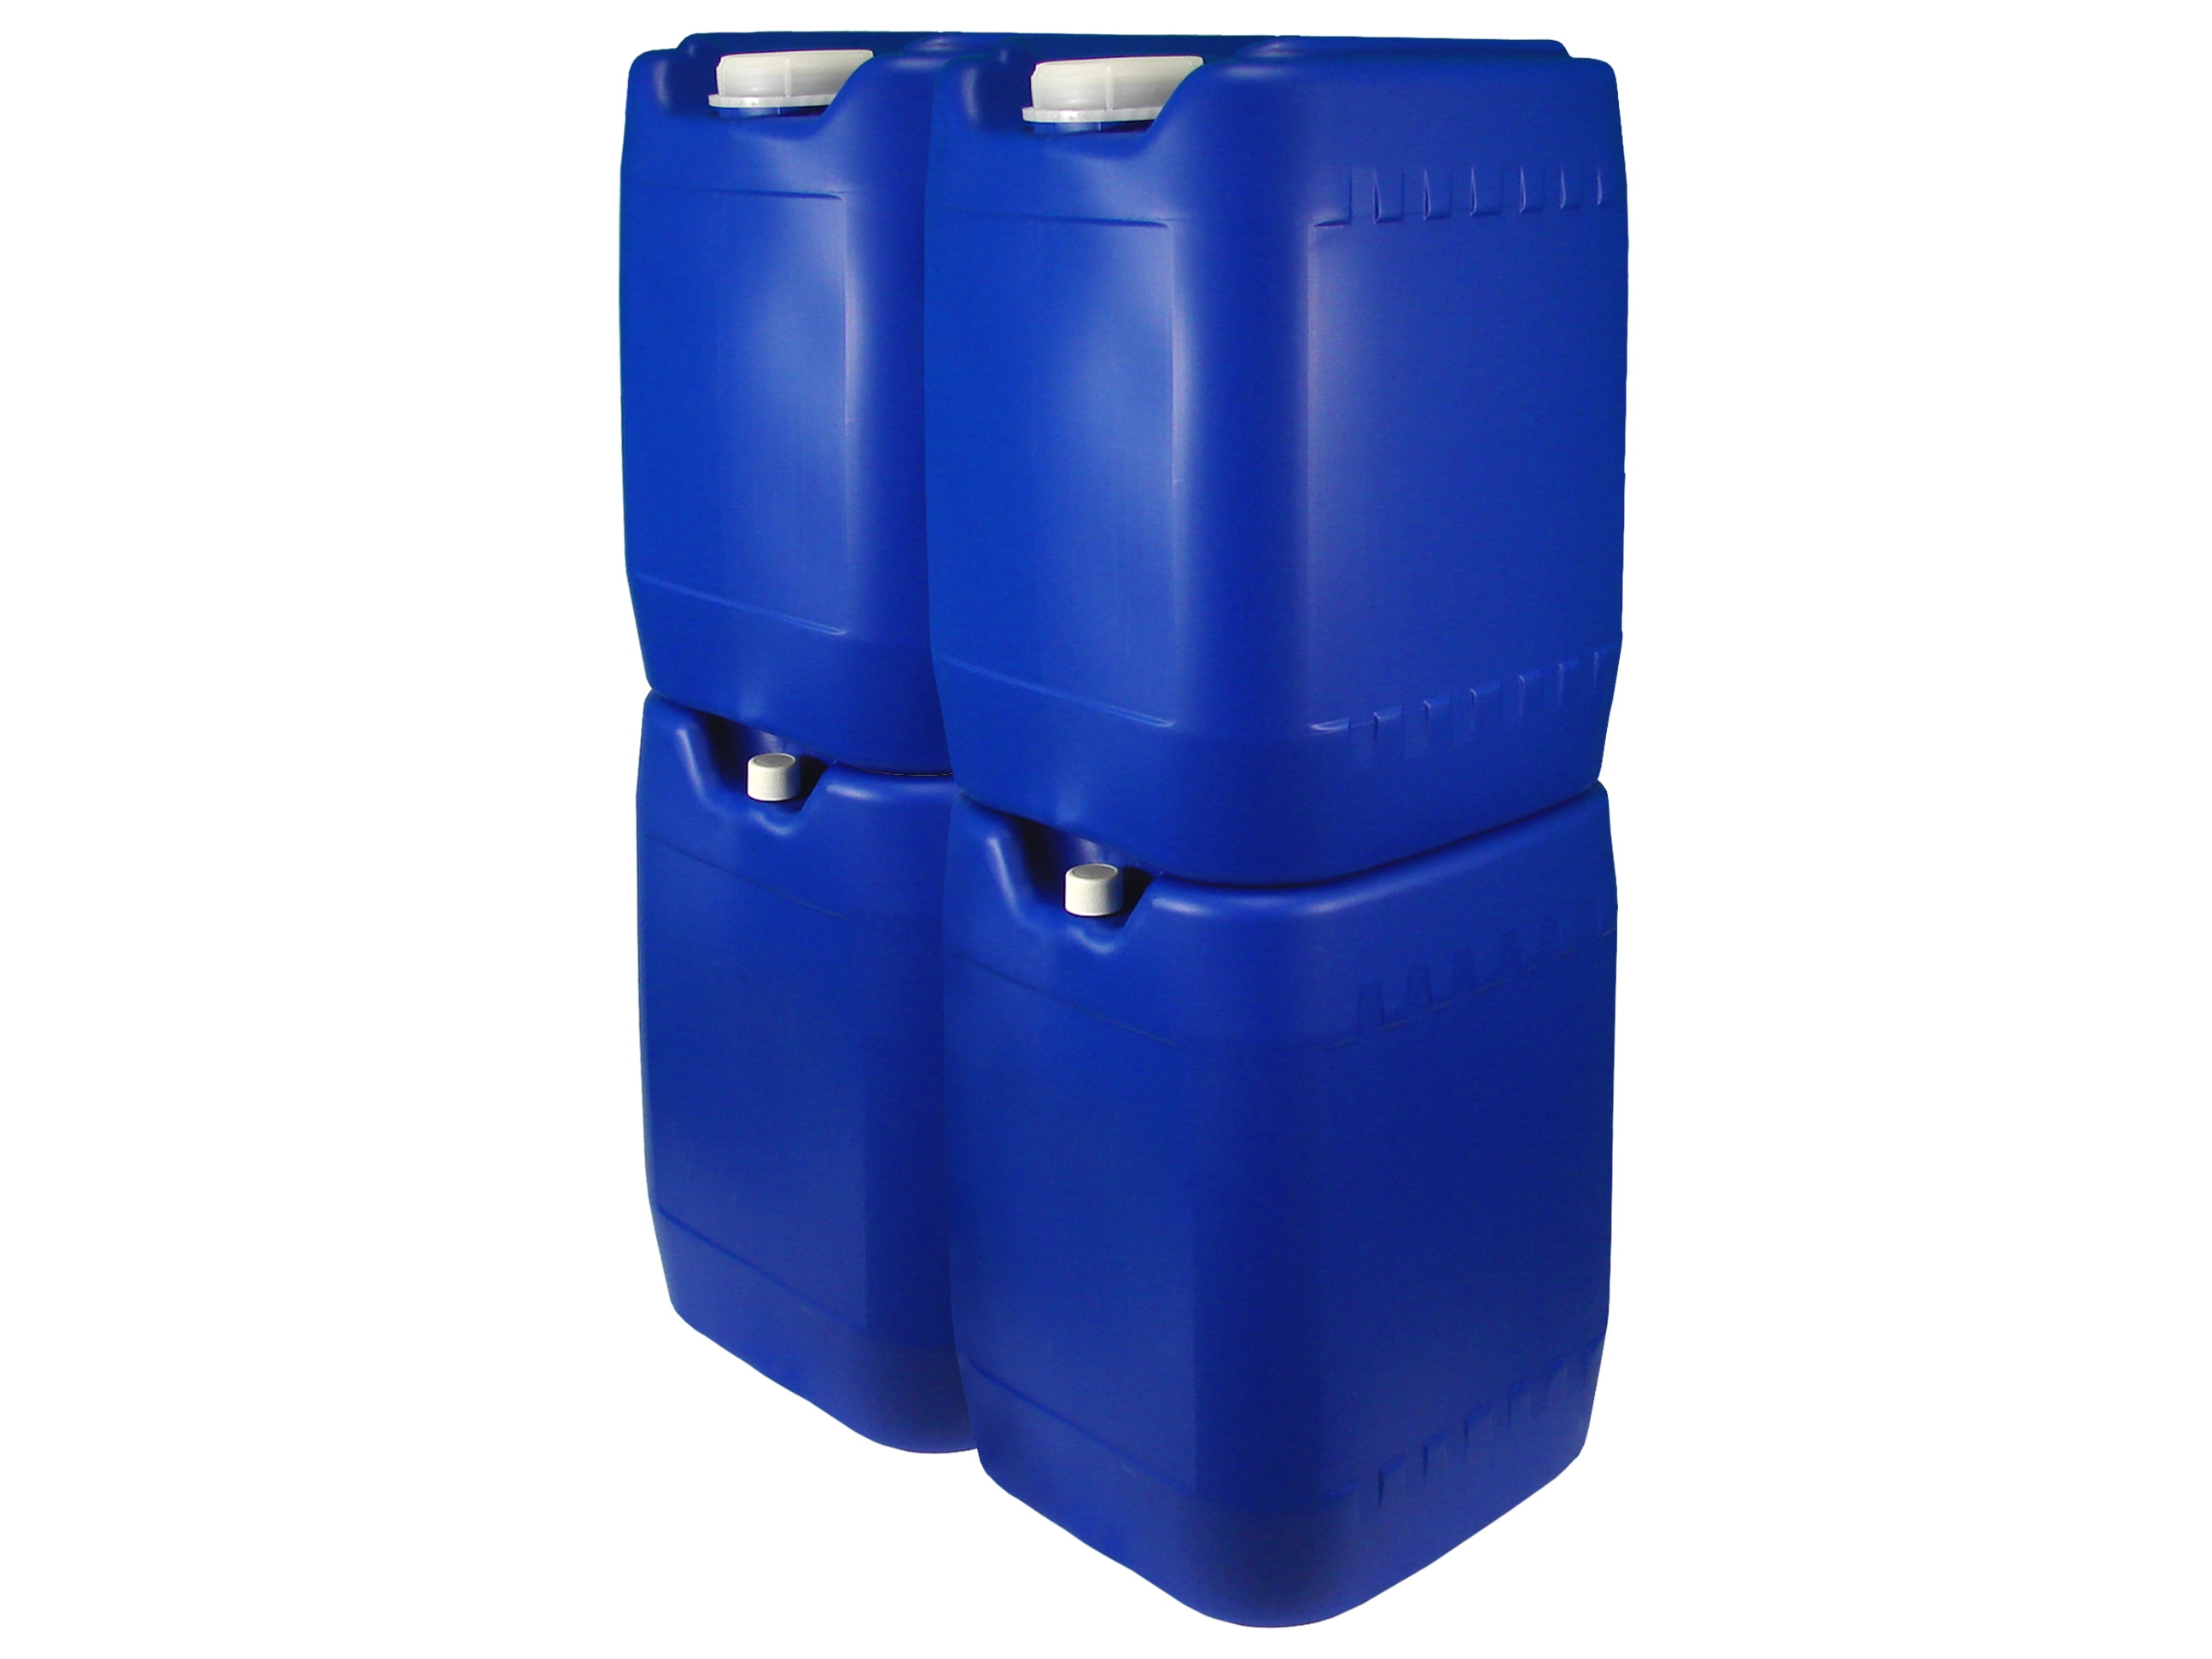 60-Gallon Stackable Water Container Essentials Kit